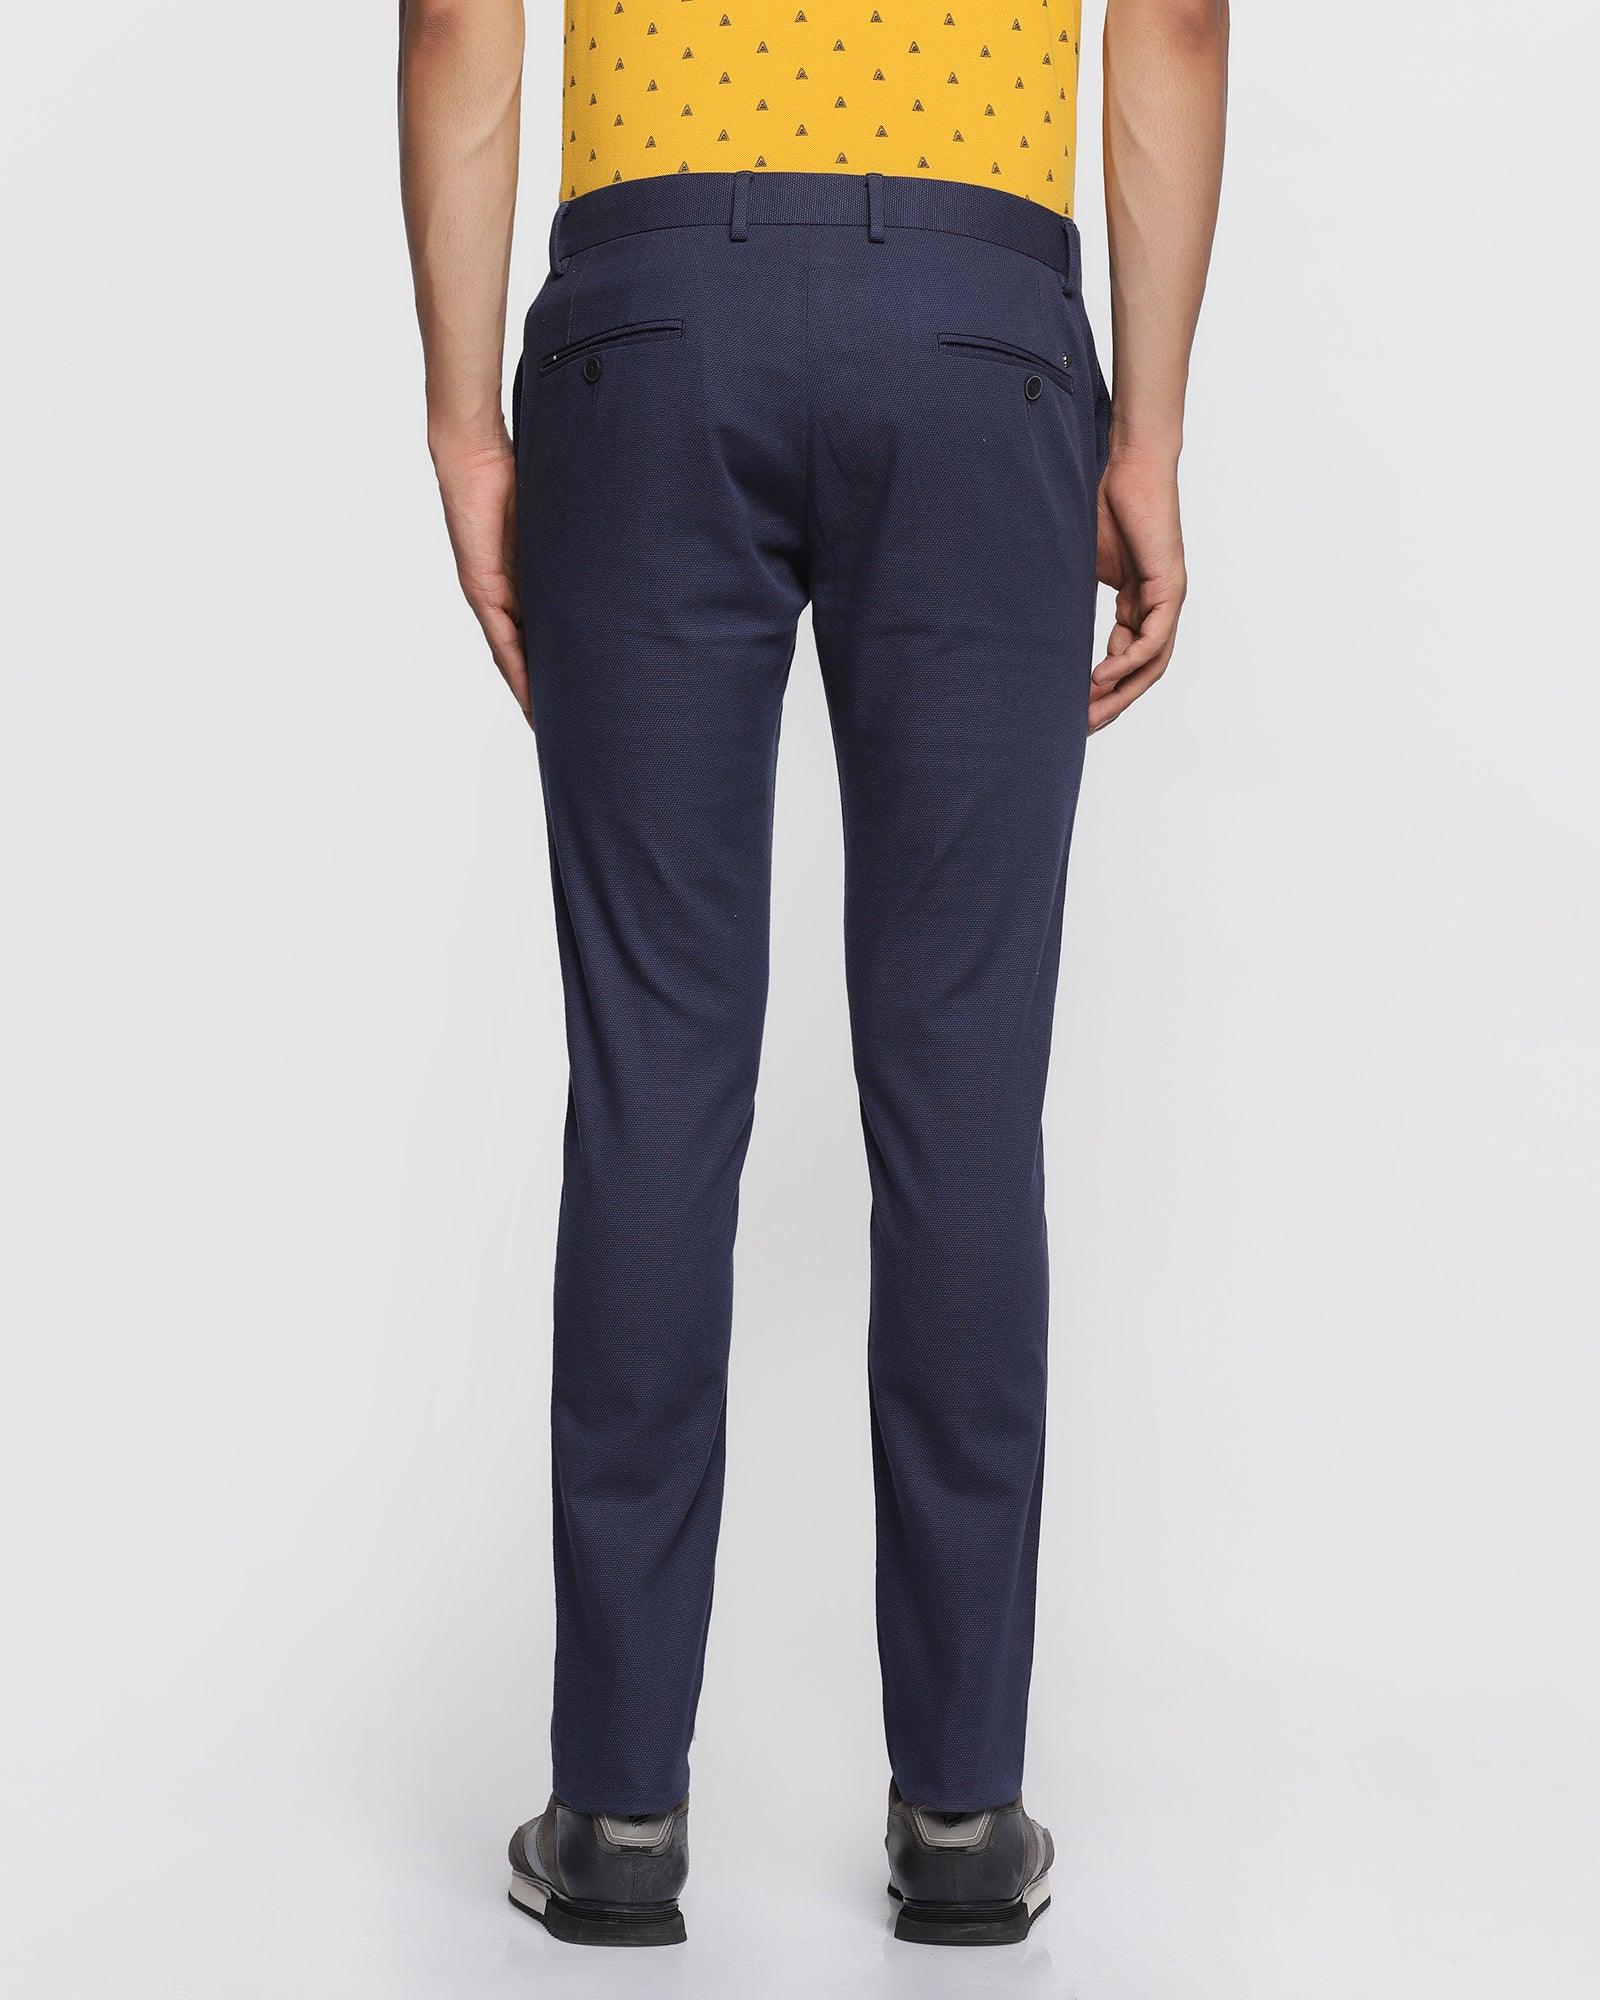 Slim Fit B-91 Casual Navy Solid Khakis - Canopus